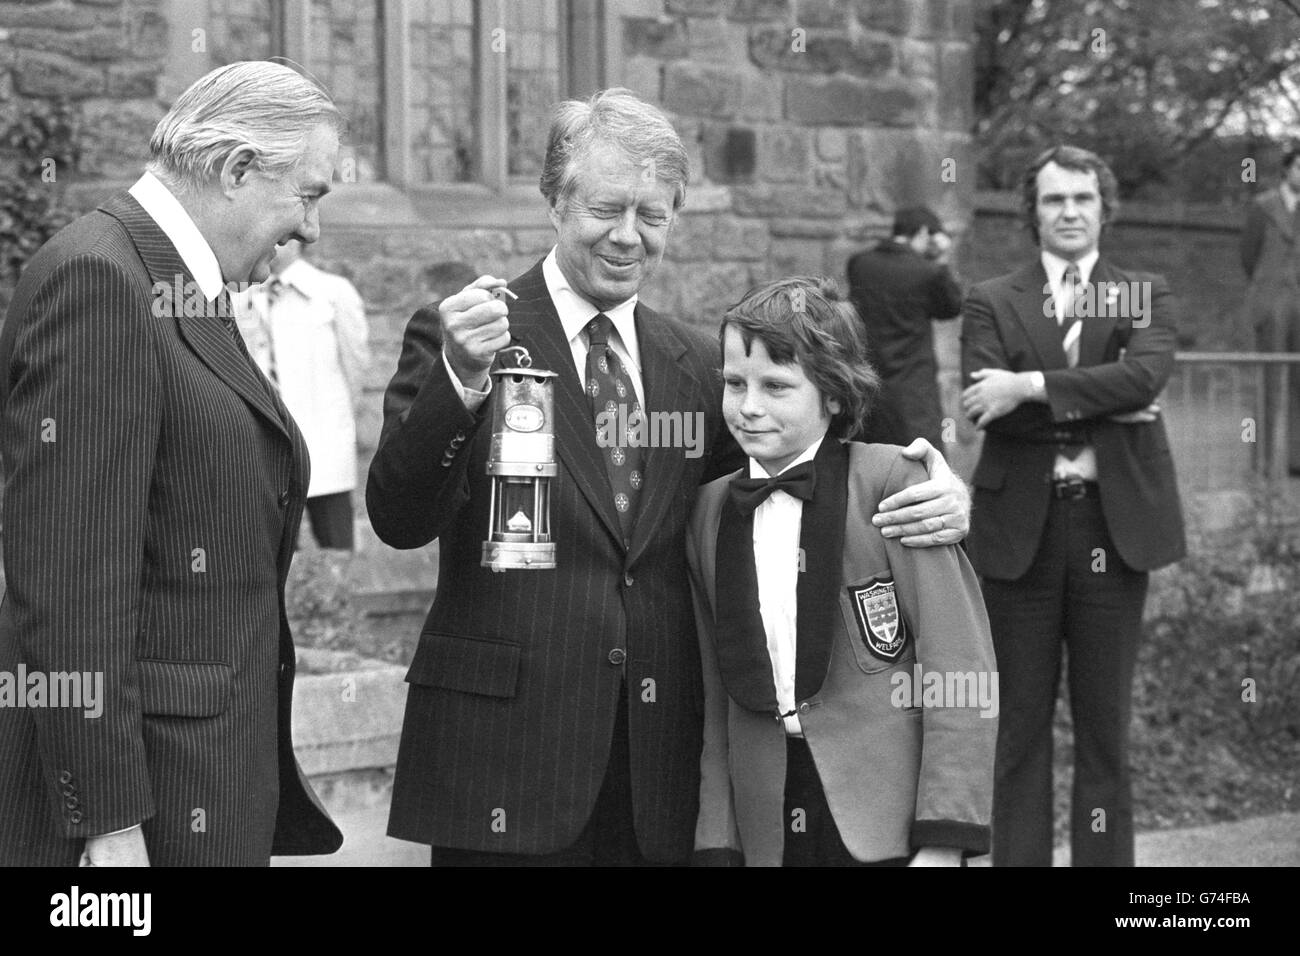 Ian McEree, 12, presents an old miner's lamp to US President Jimmy Carter on behalf of Washington village. He received an oil painting of Mount Vernon in return. The President was on a visit to Washington Old Hall, home of the forefathers of America's first president George Washington. Stock Photo